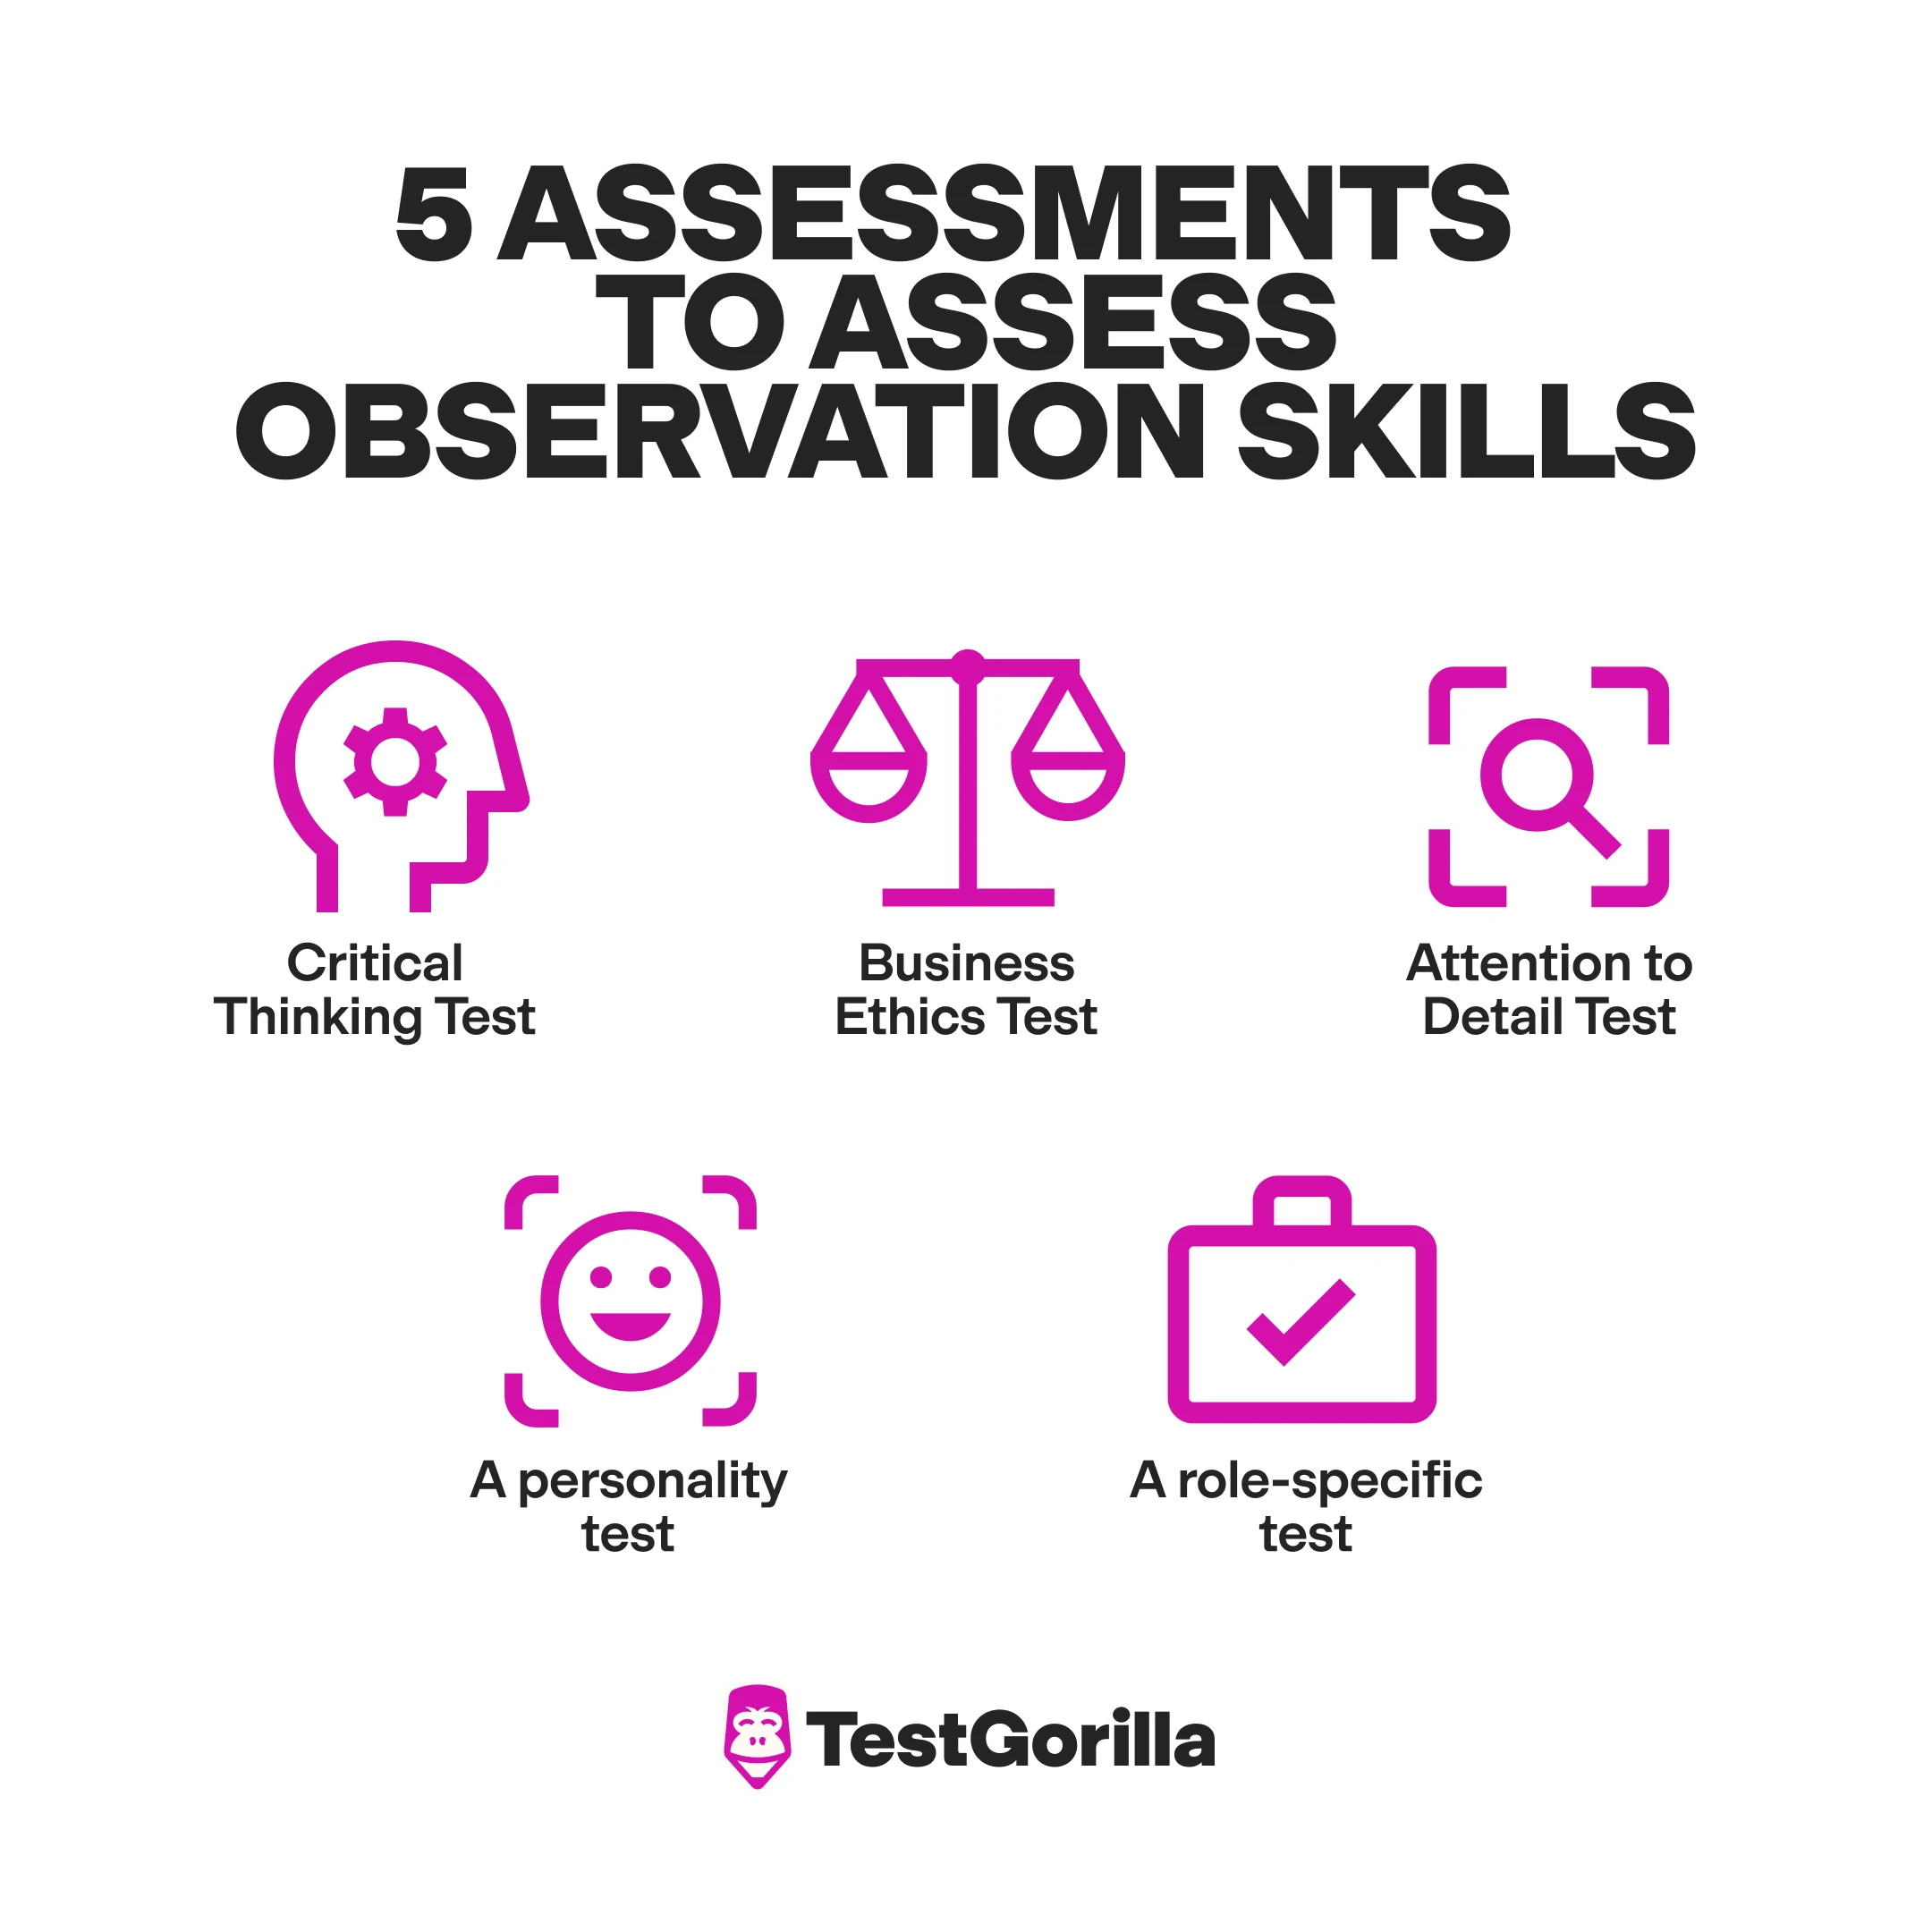 5-Assessments-to-assess-observation-skills